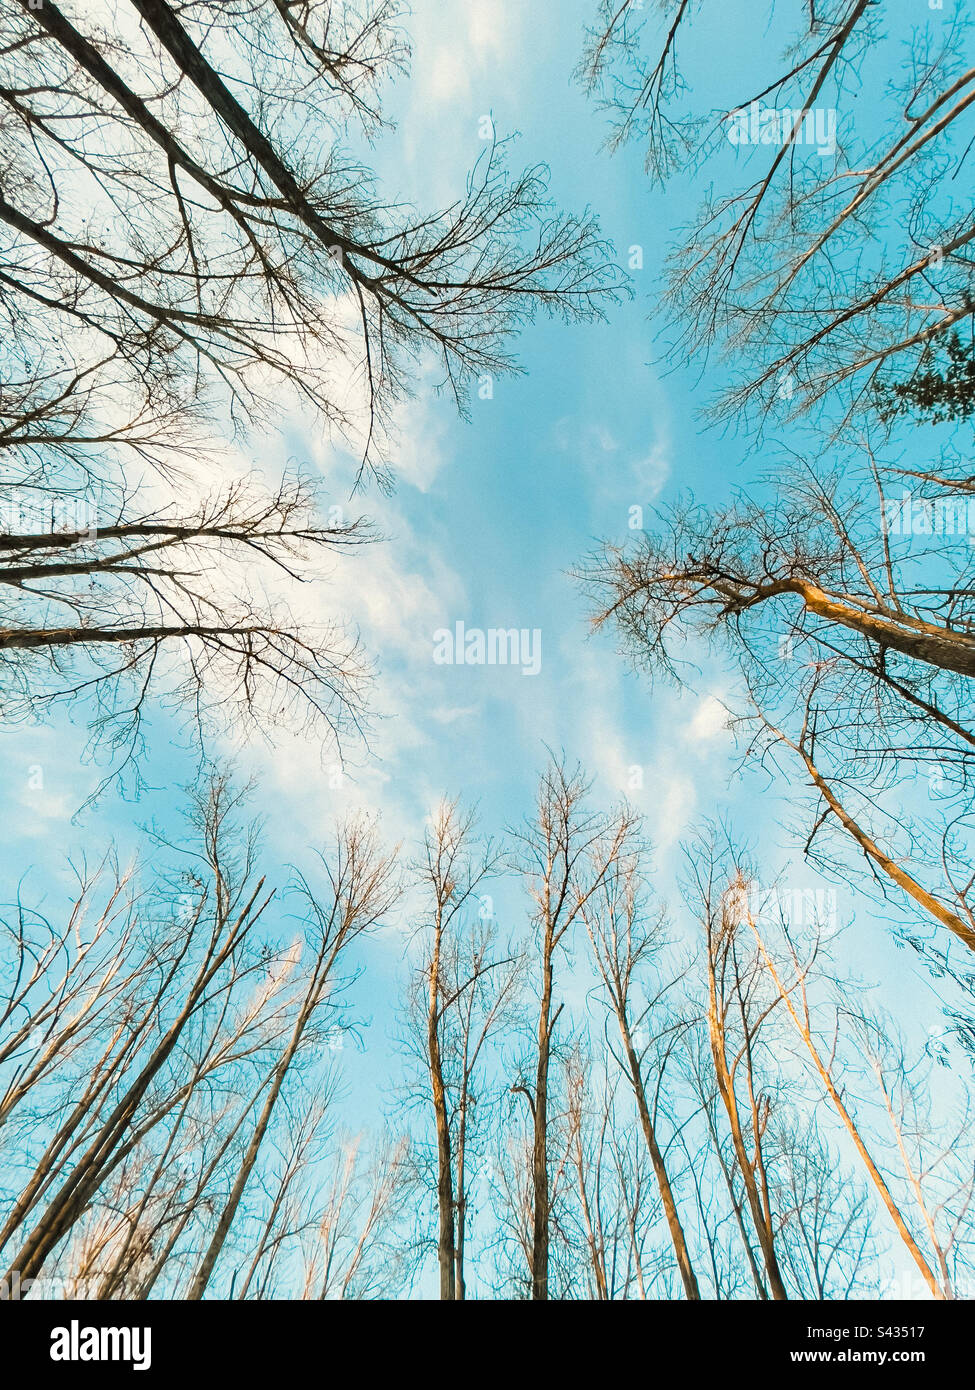 Low angle view of leafless tree canopy in winter with blue sky. Stock Photo